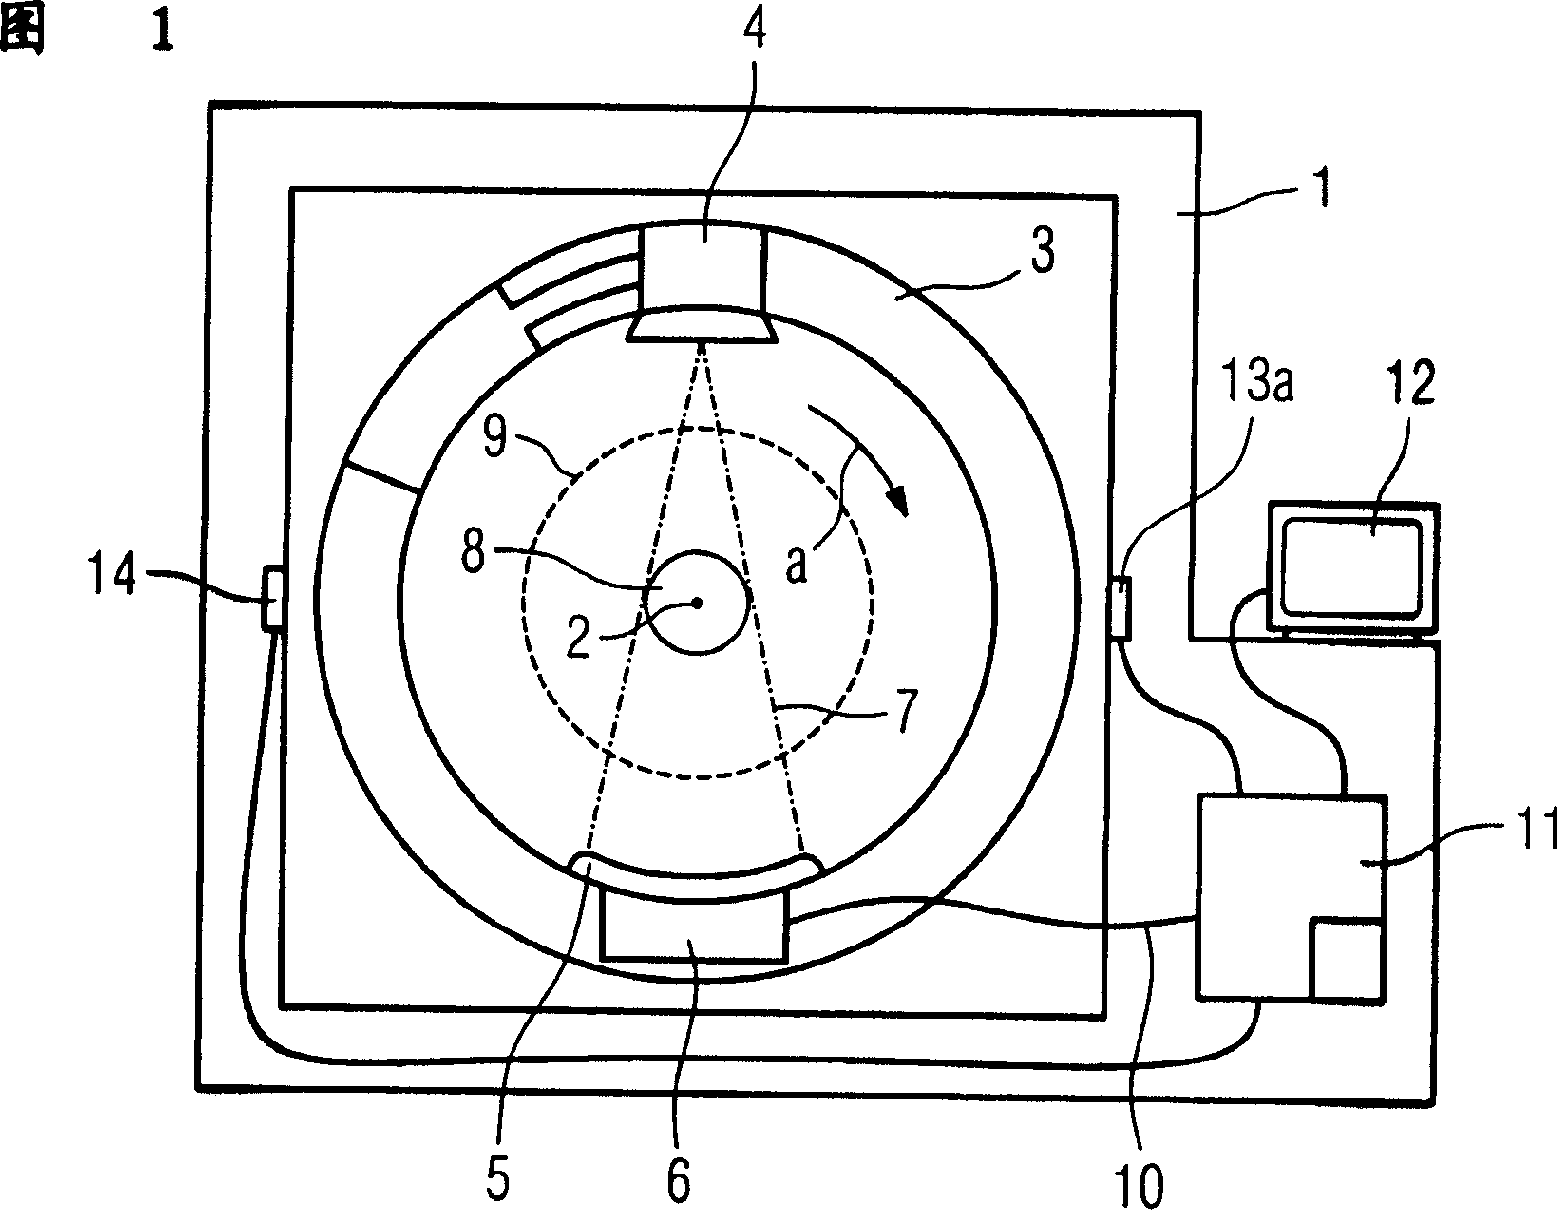 Imaging fault contrast device